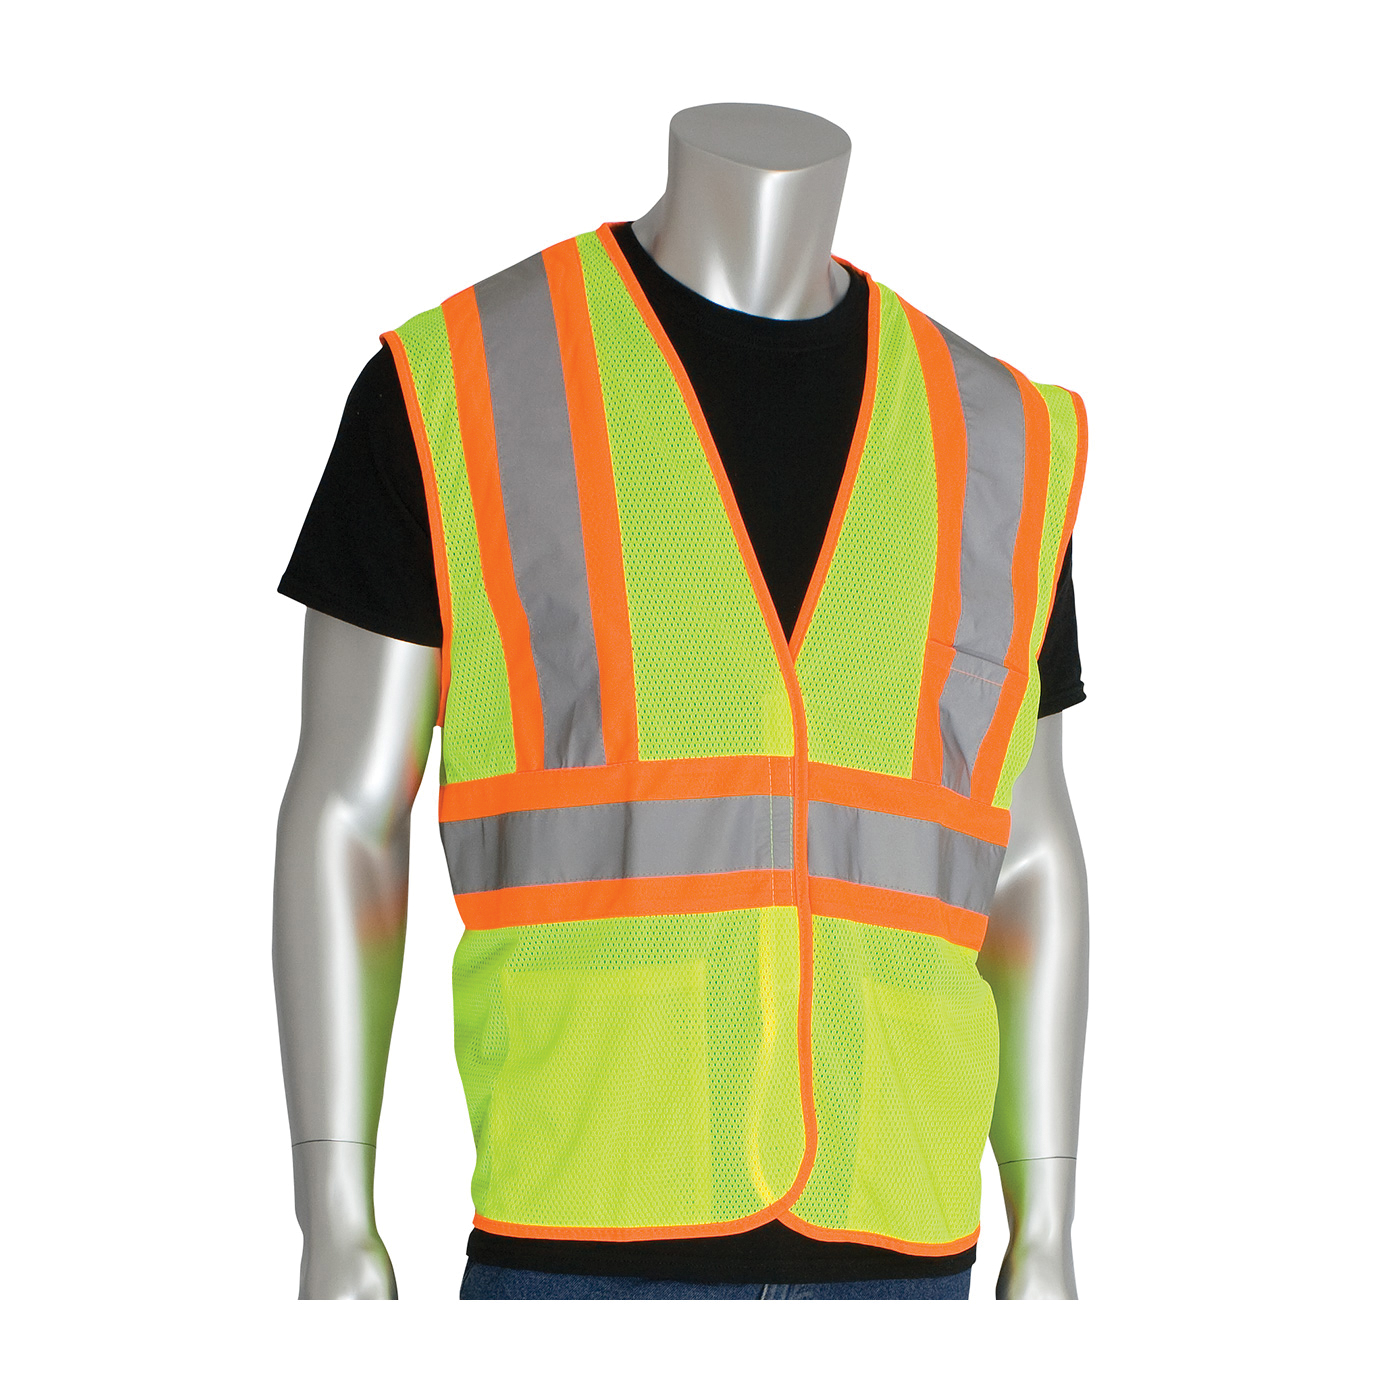 PIP® 302-MVATLY-M 2-Tone Safety Vest, M, Hi-Viz Lime Yellow, Polyester, Hook and Loop Closure, 3 Pockets, ANSI Class: Class 2, Specifications Met: ANSI Specified